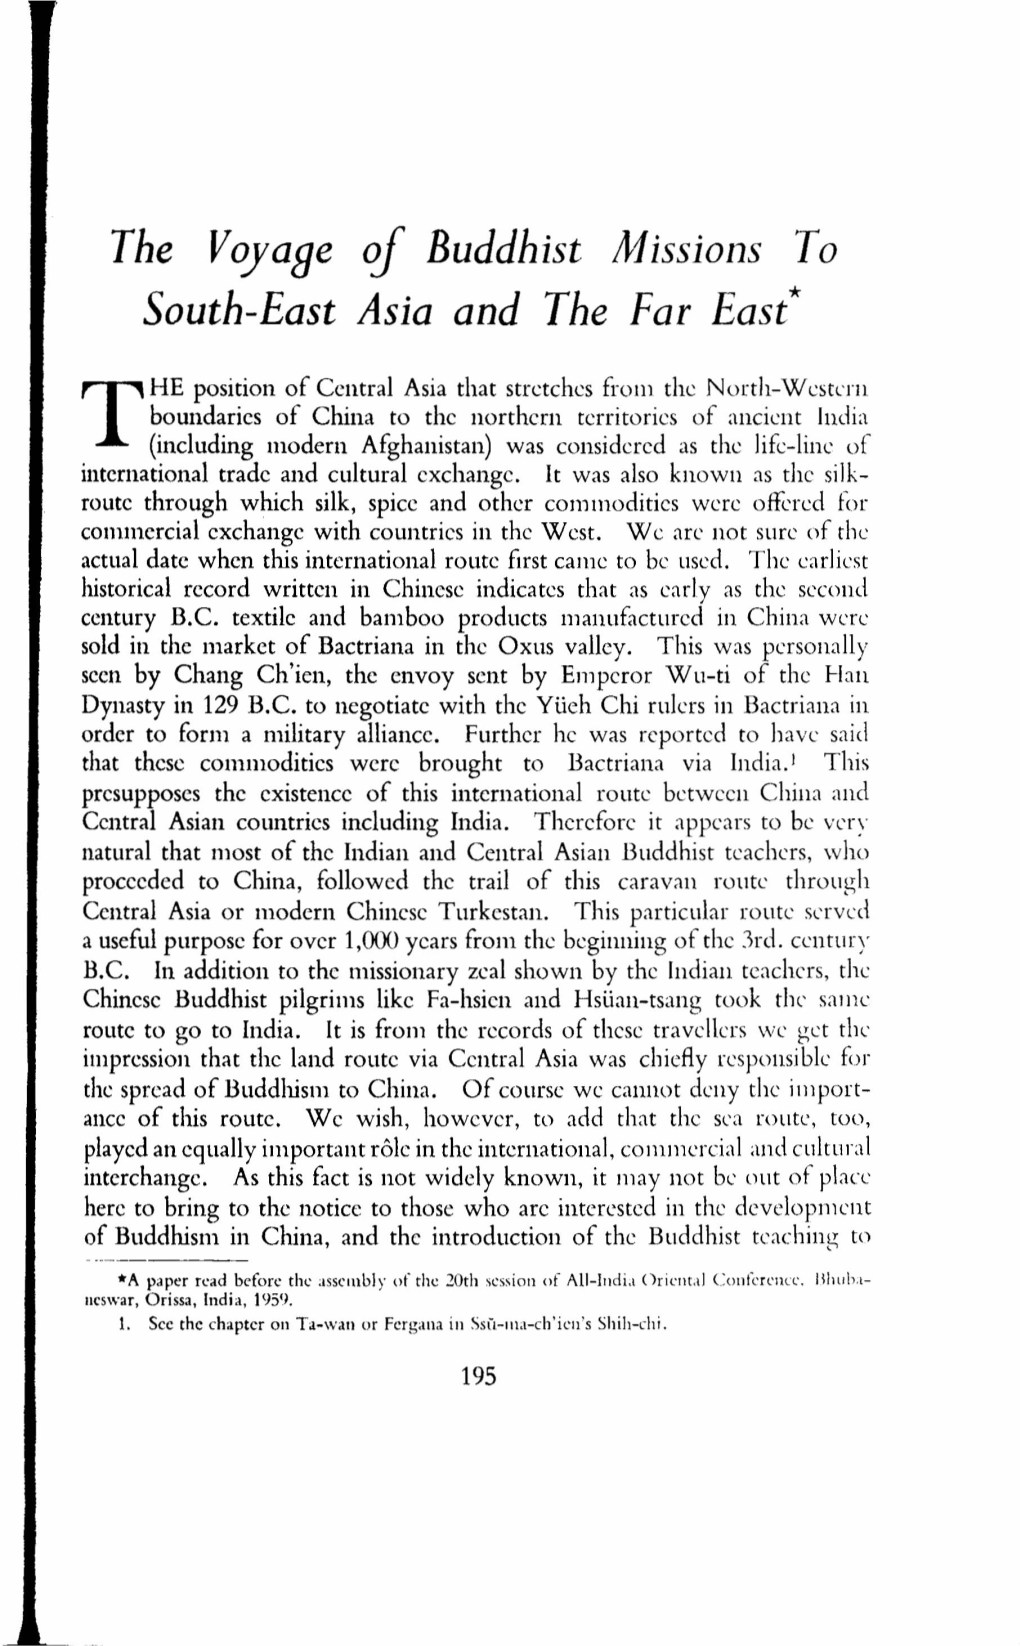 The Voyabe of Buddhist Jllissions to South-East Asia and the Far East*